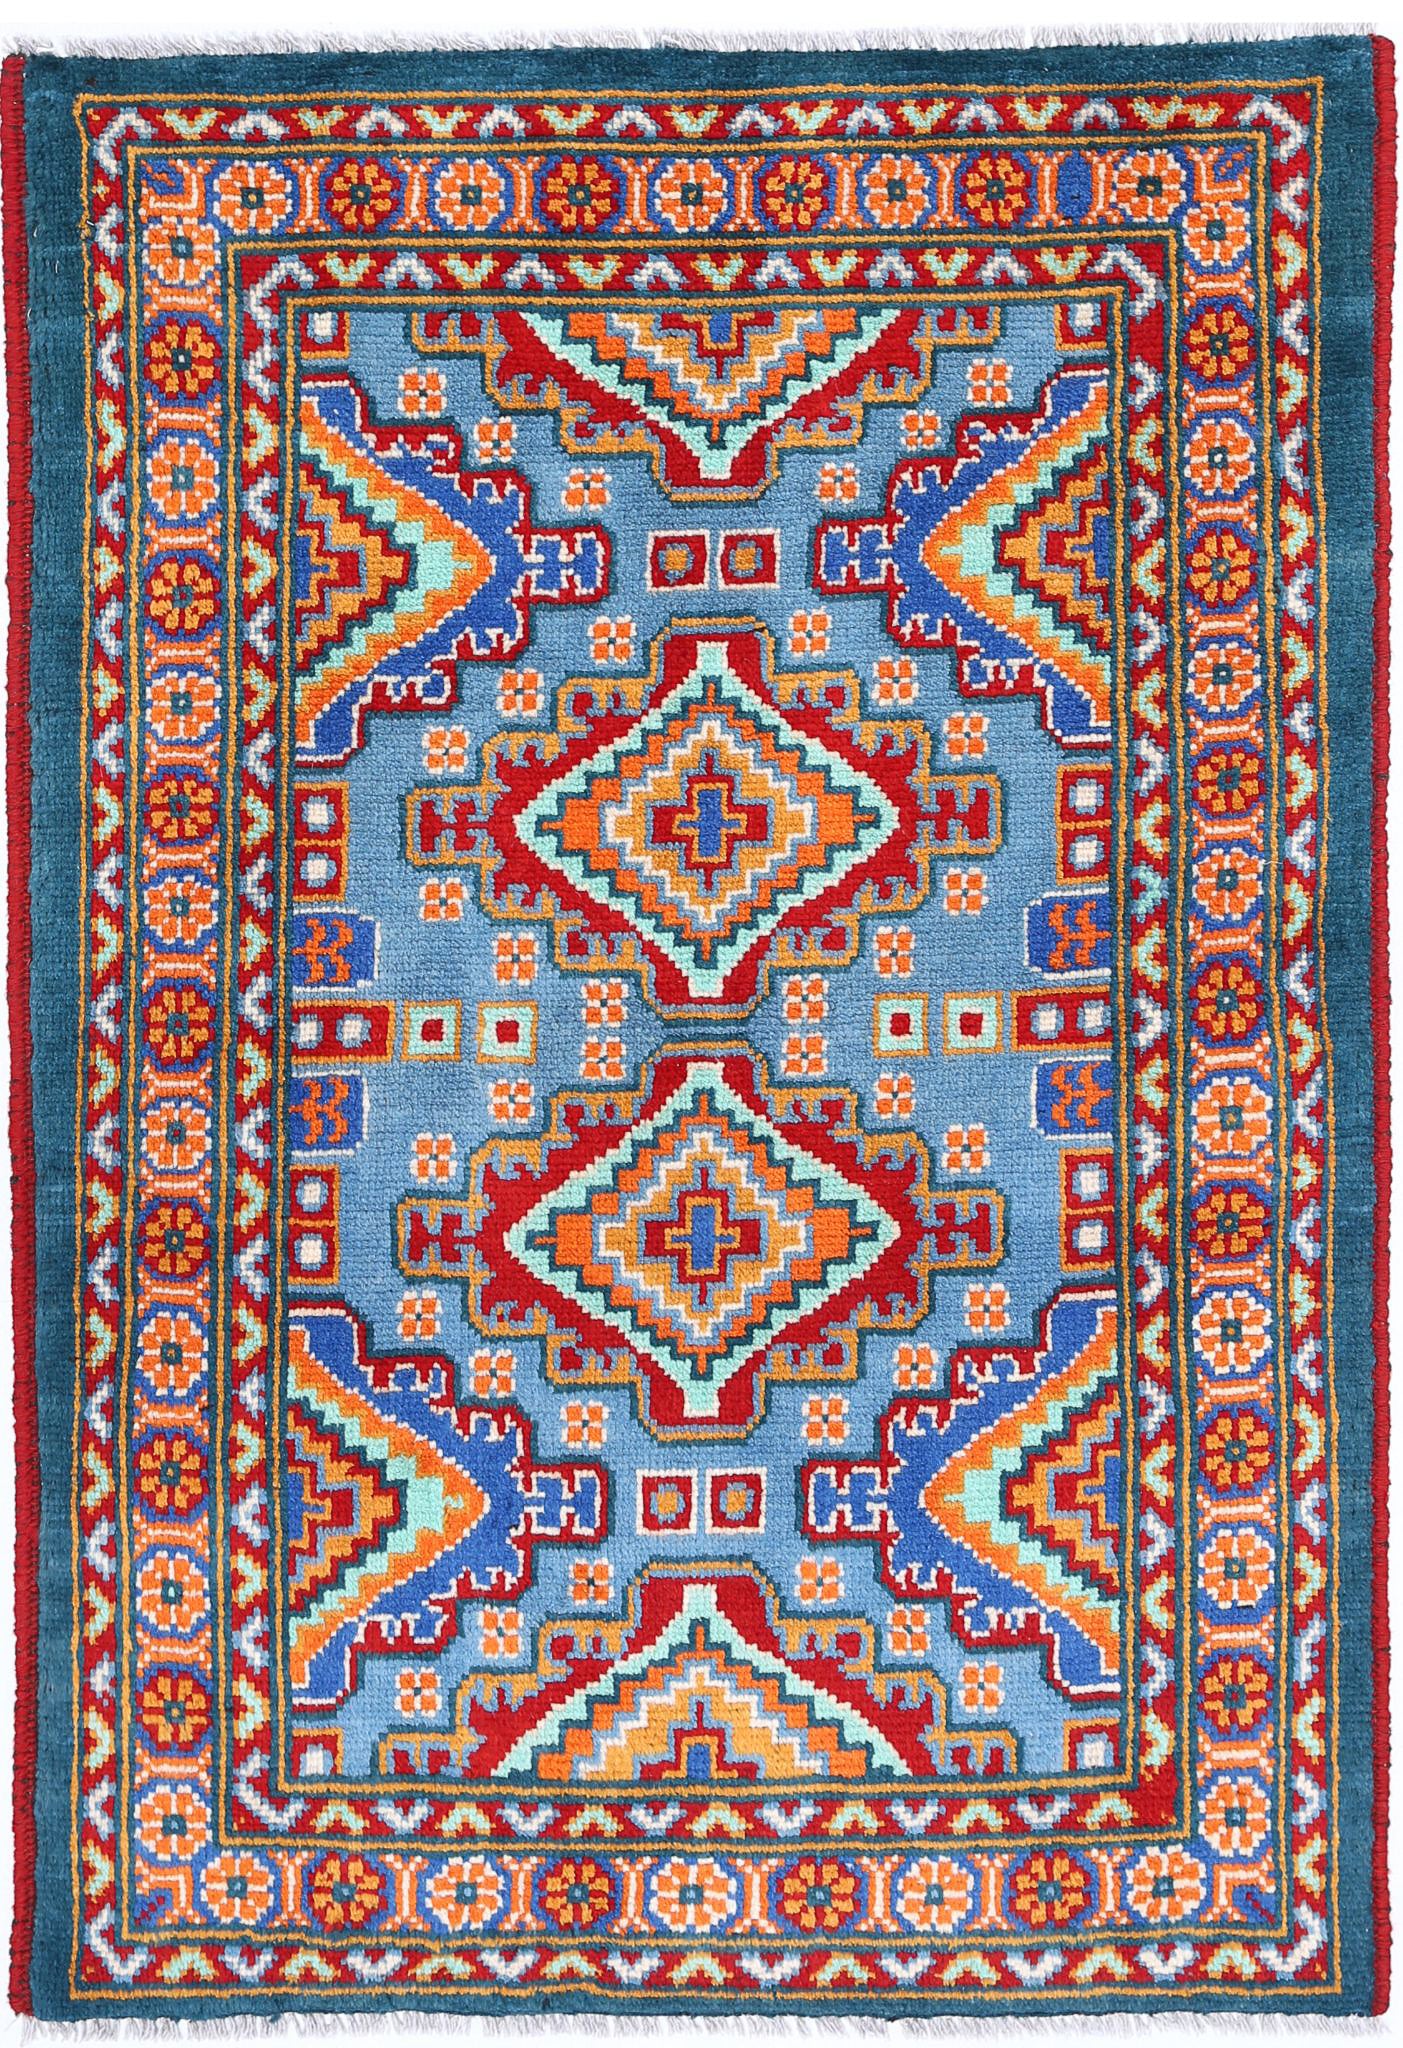 Revival-hand-knotted-qarghani-wool-rug-5014048.jpg